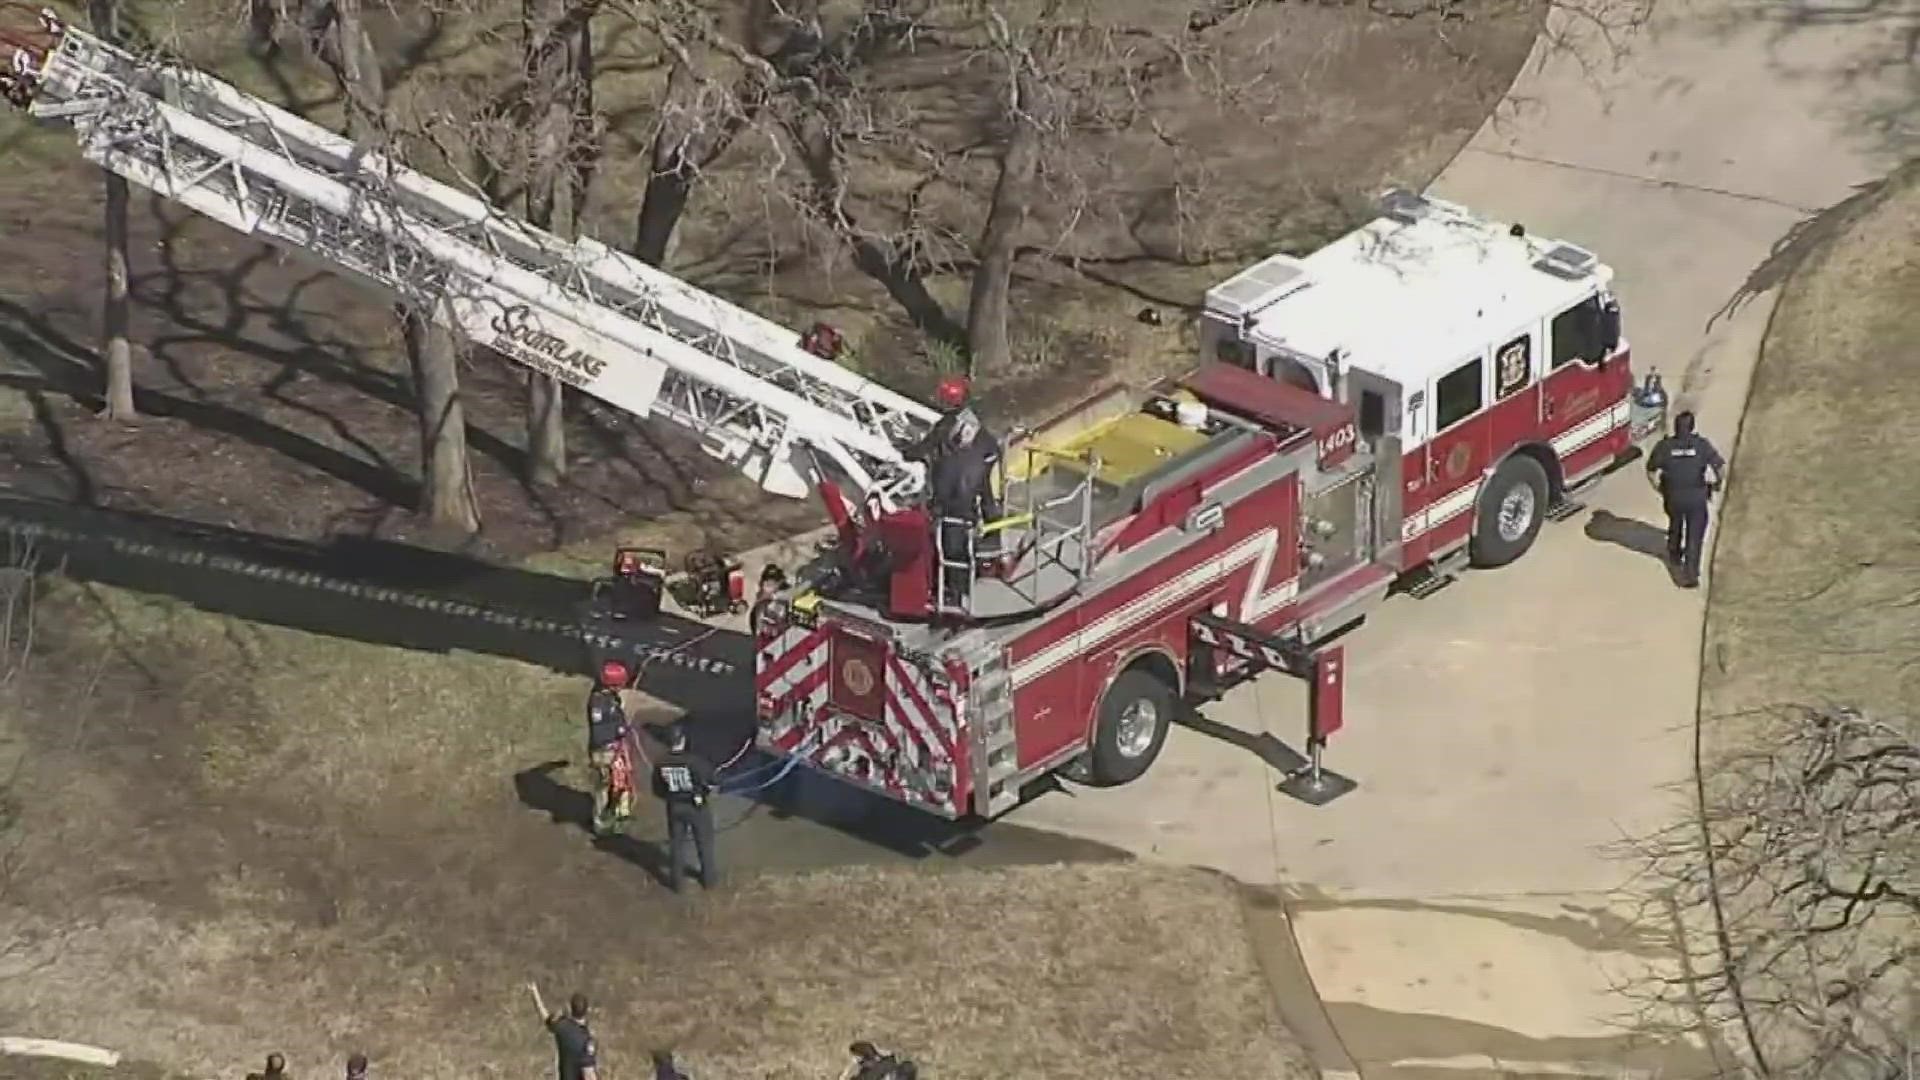 When first responders arrived, they found a man unconscious and suspended by a harness in a tree, police said.